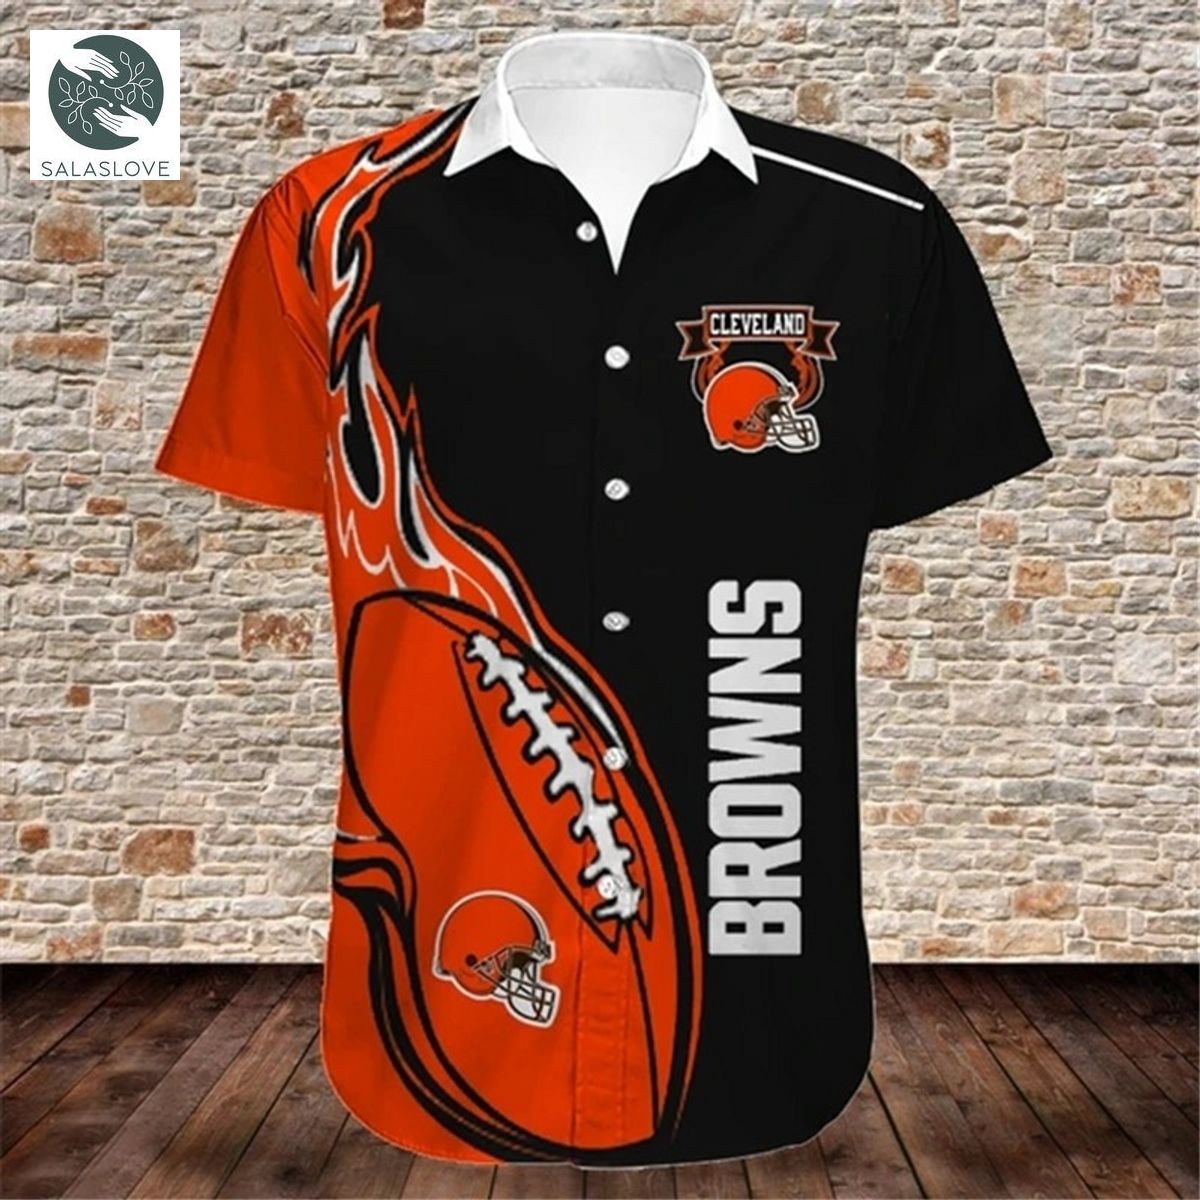 Cleveland Browns Shirts Cute Flame Balls graphic gift for men